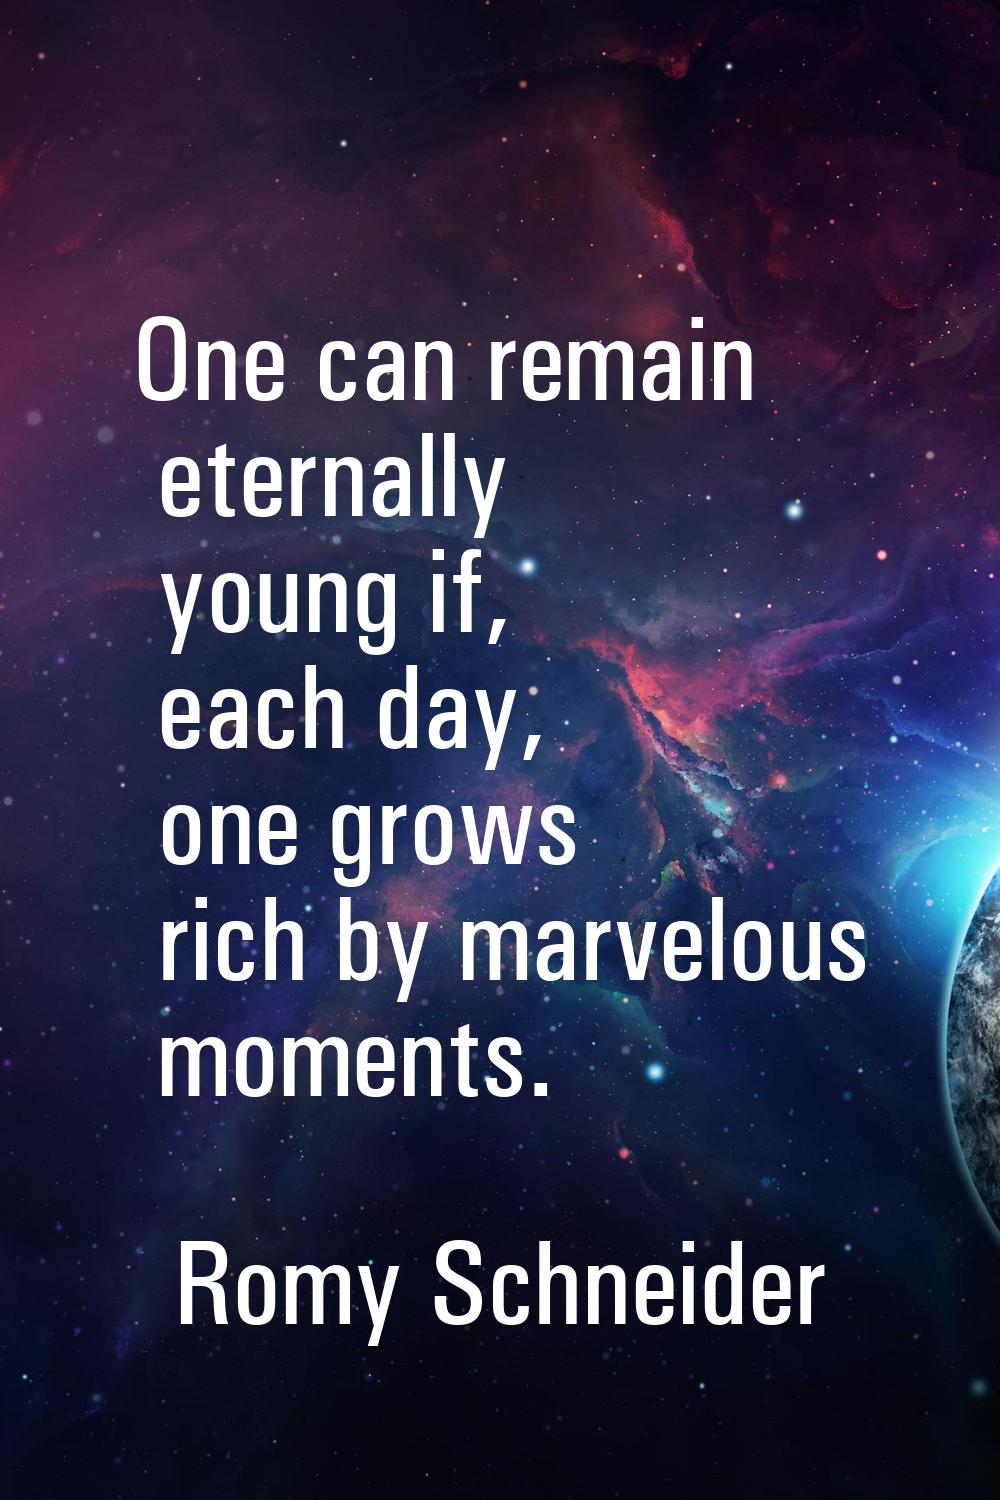 One can remain eternally young if, each day, one grows rich by marvelous moments.